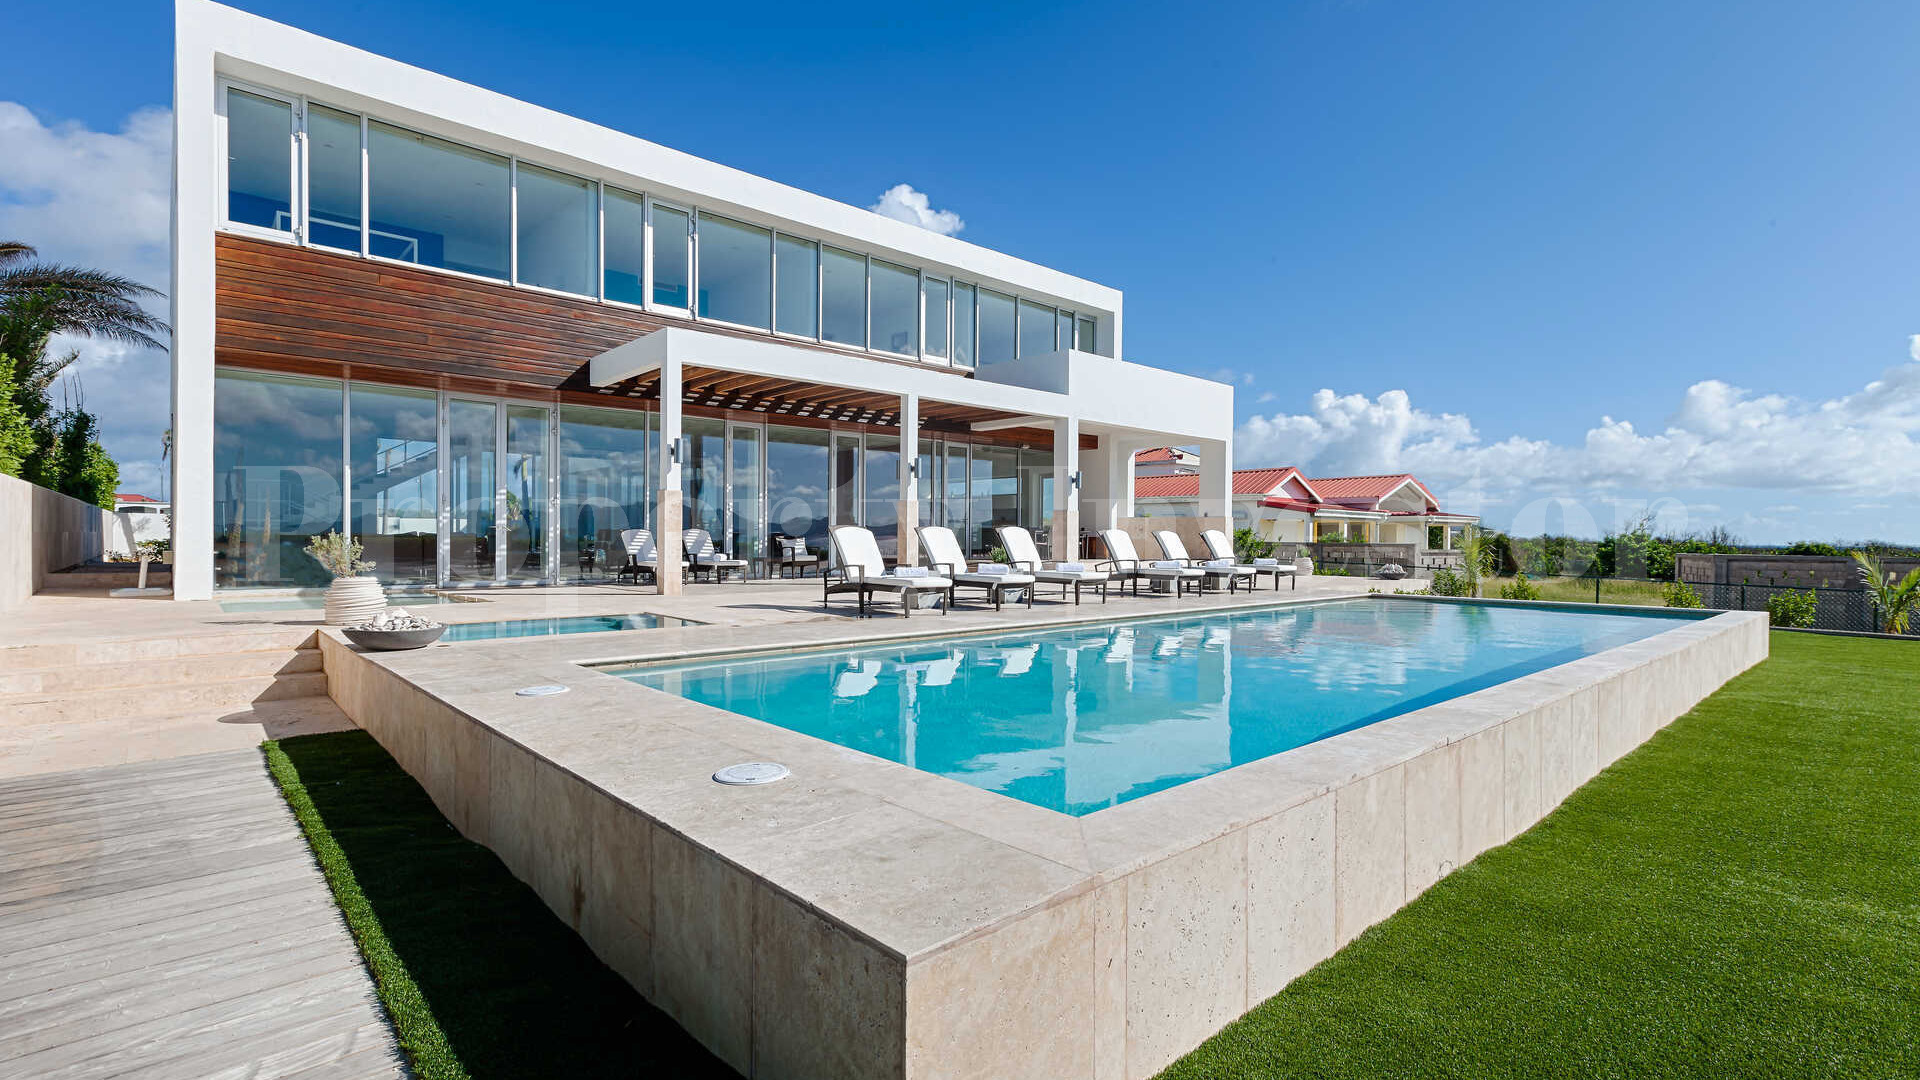 Chic 5 Bedroom Luxury Beachfront Villa at Blowing Point, Anguilla